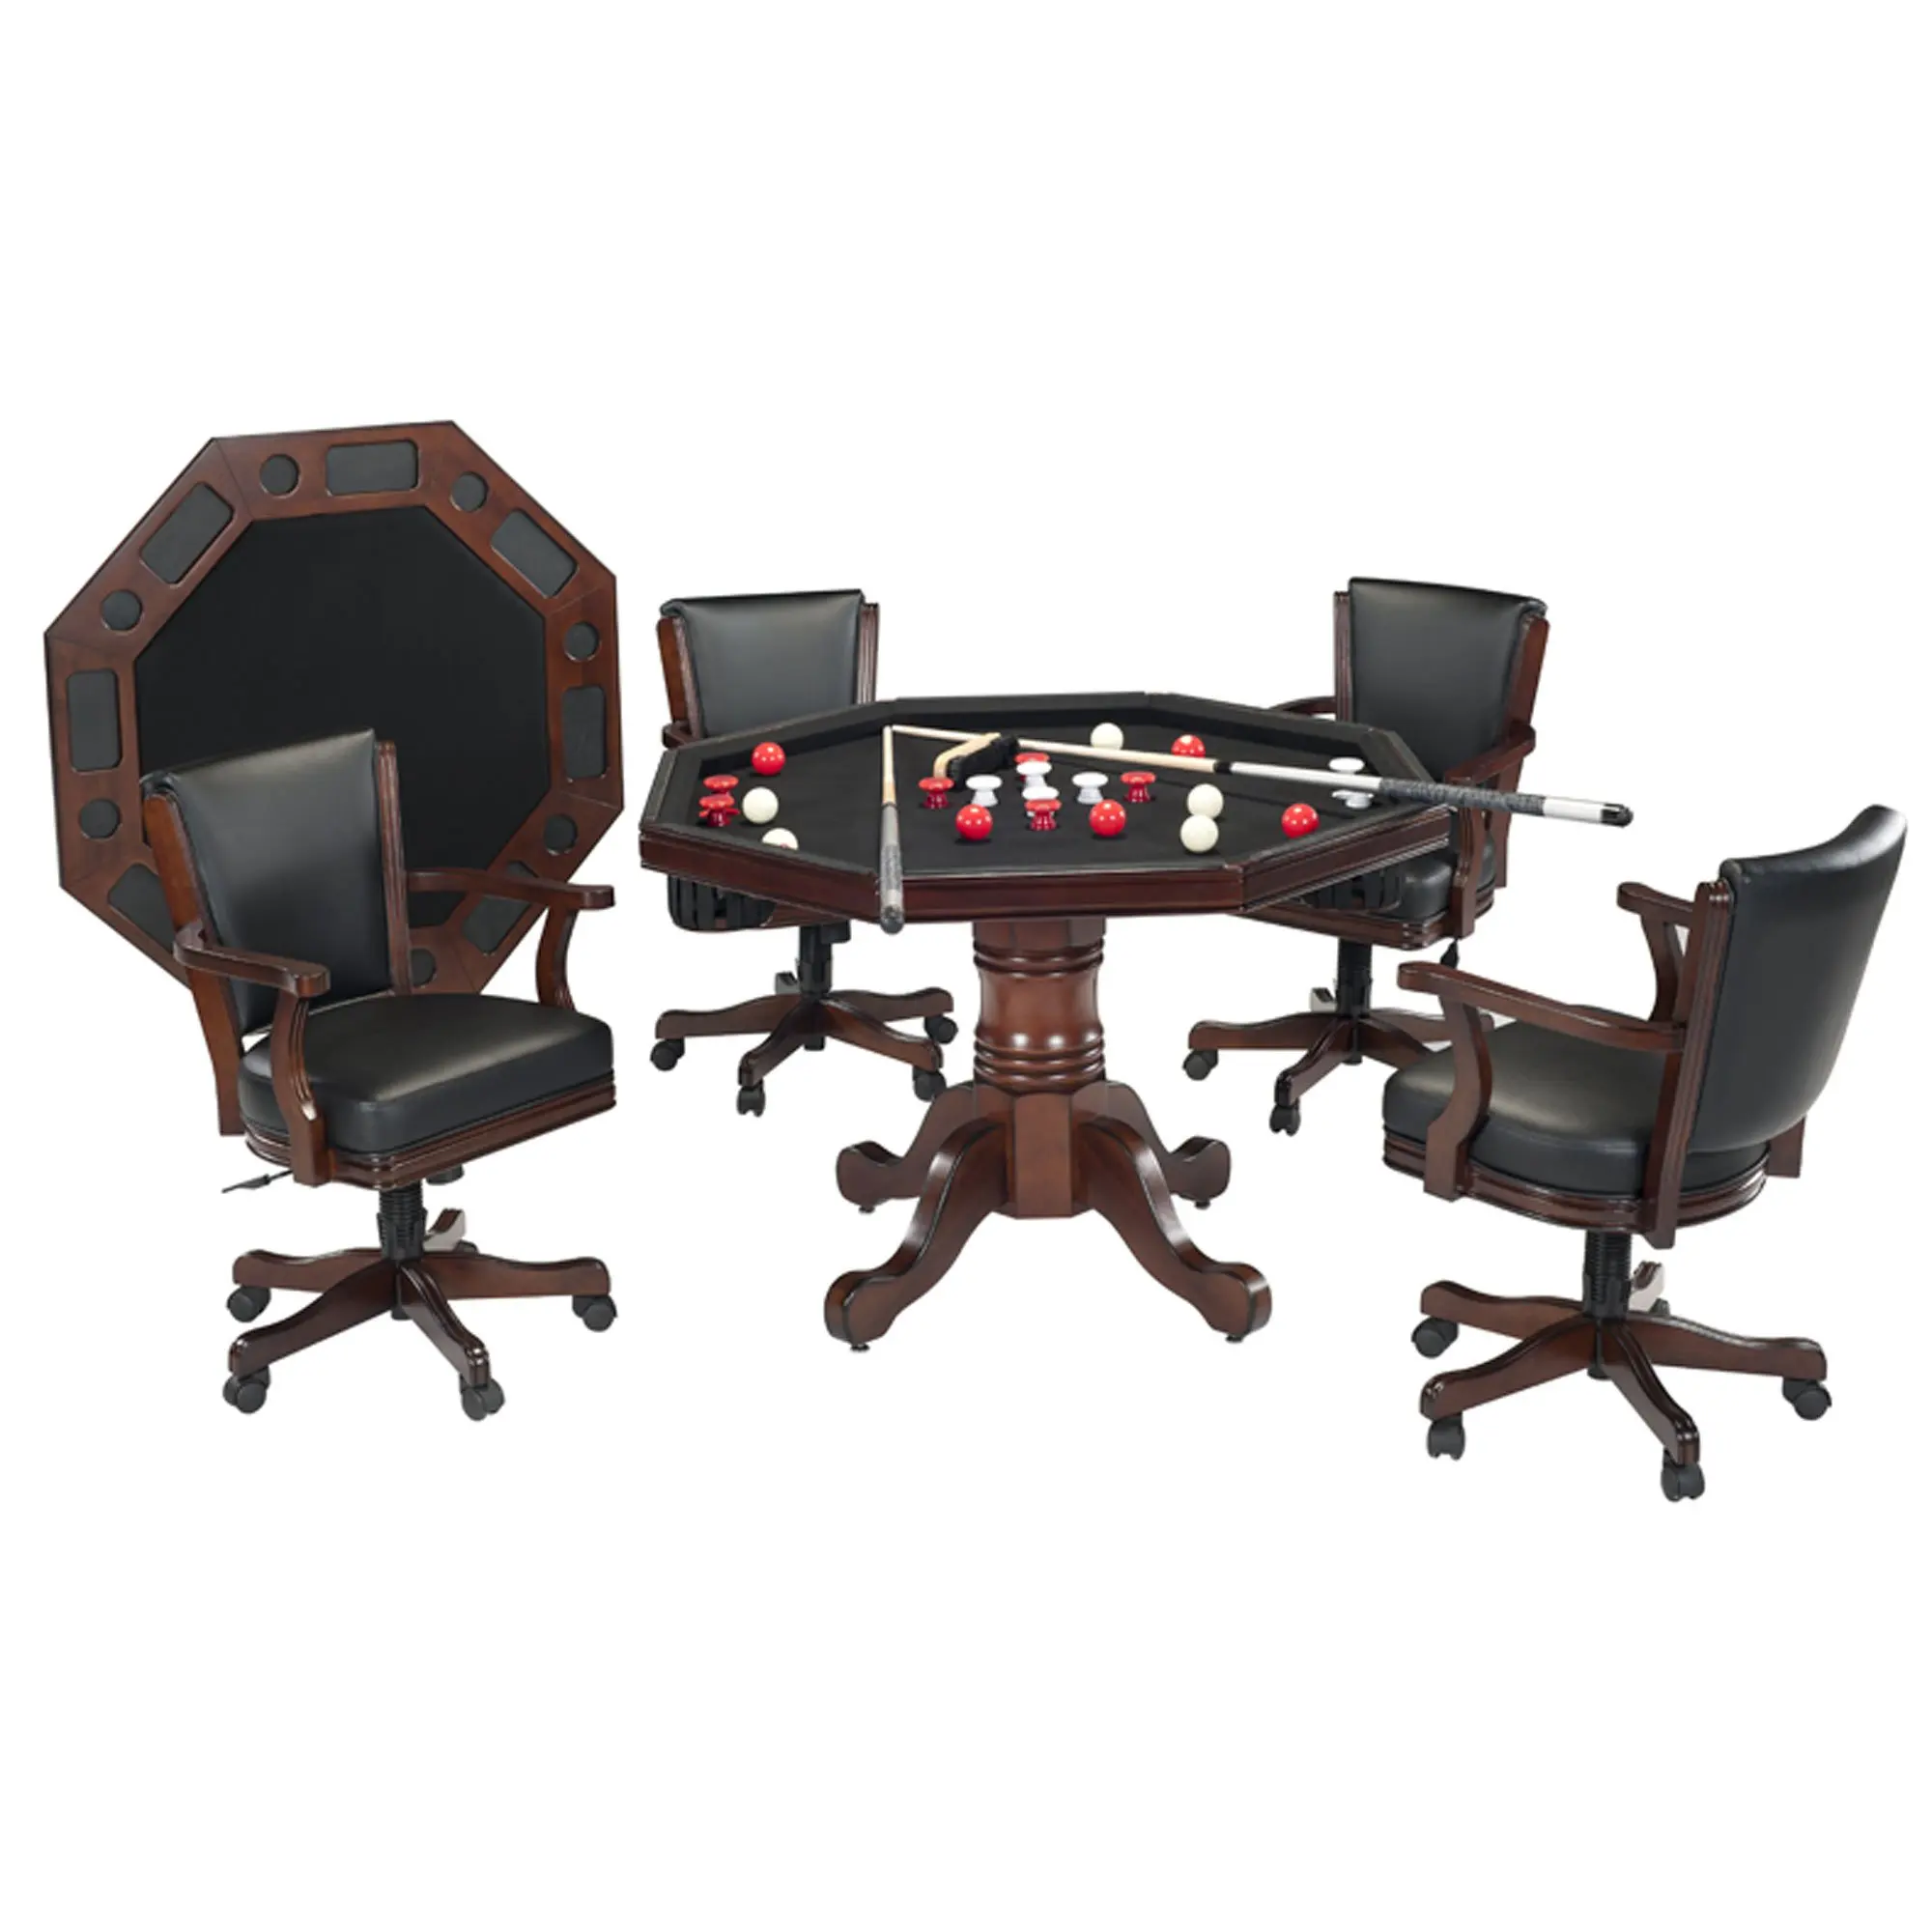 4in1 Casino Game Table By Trademark Poker